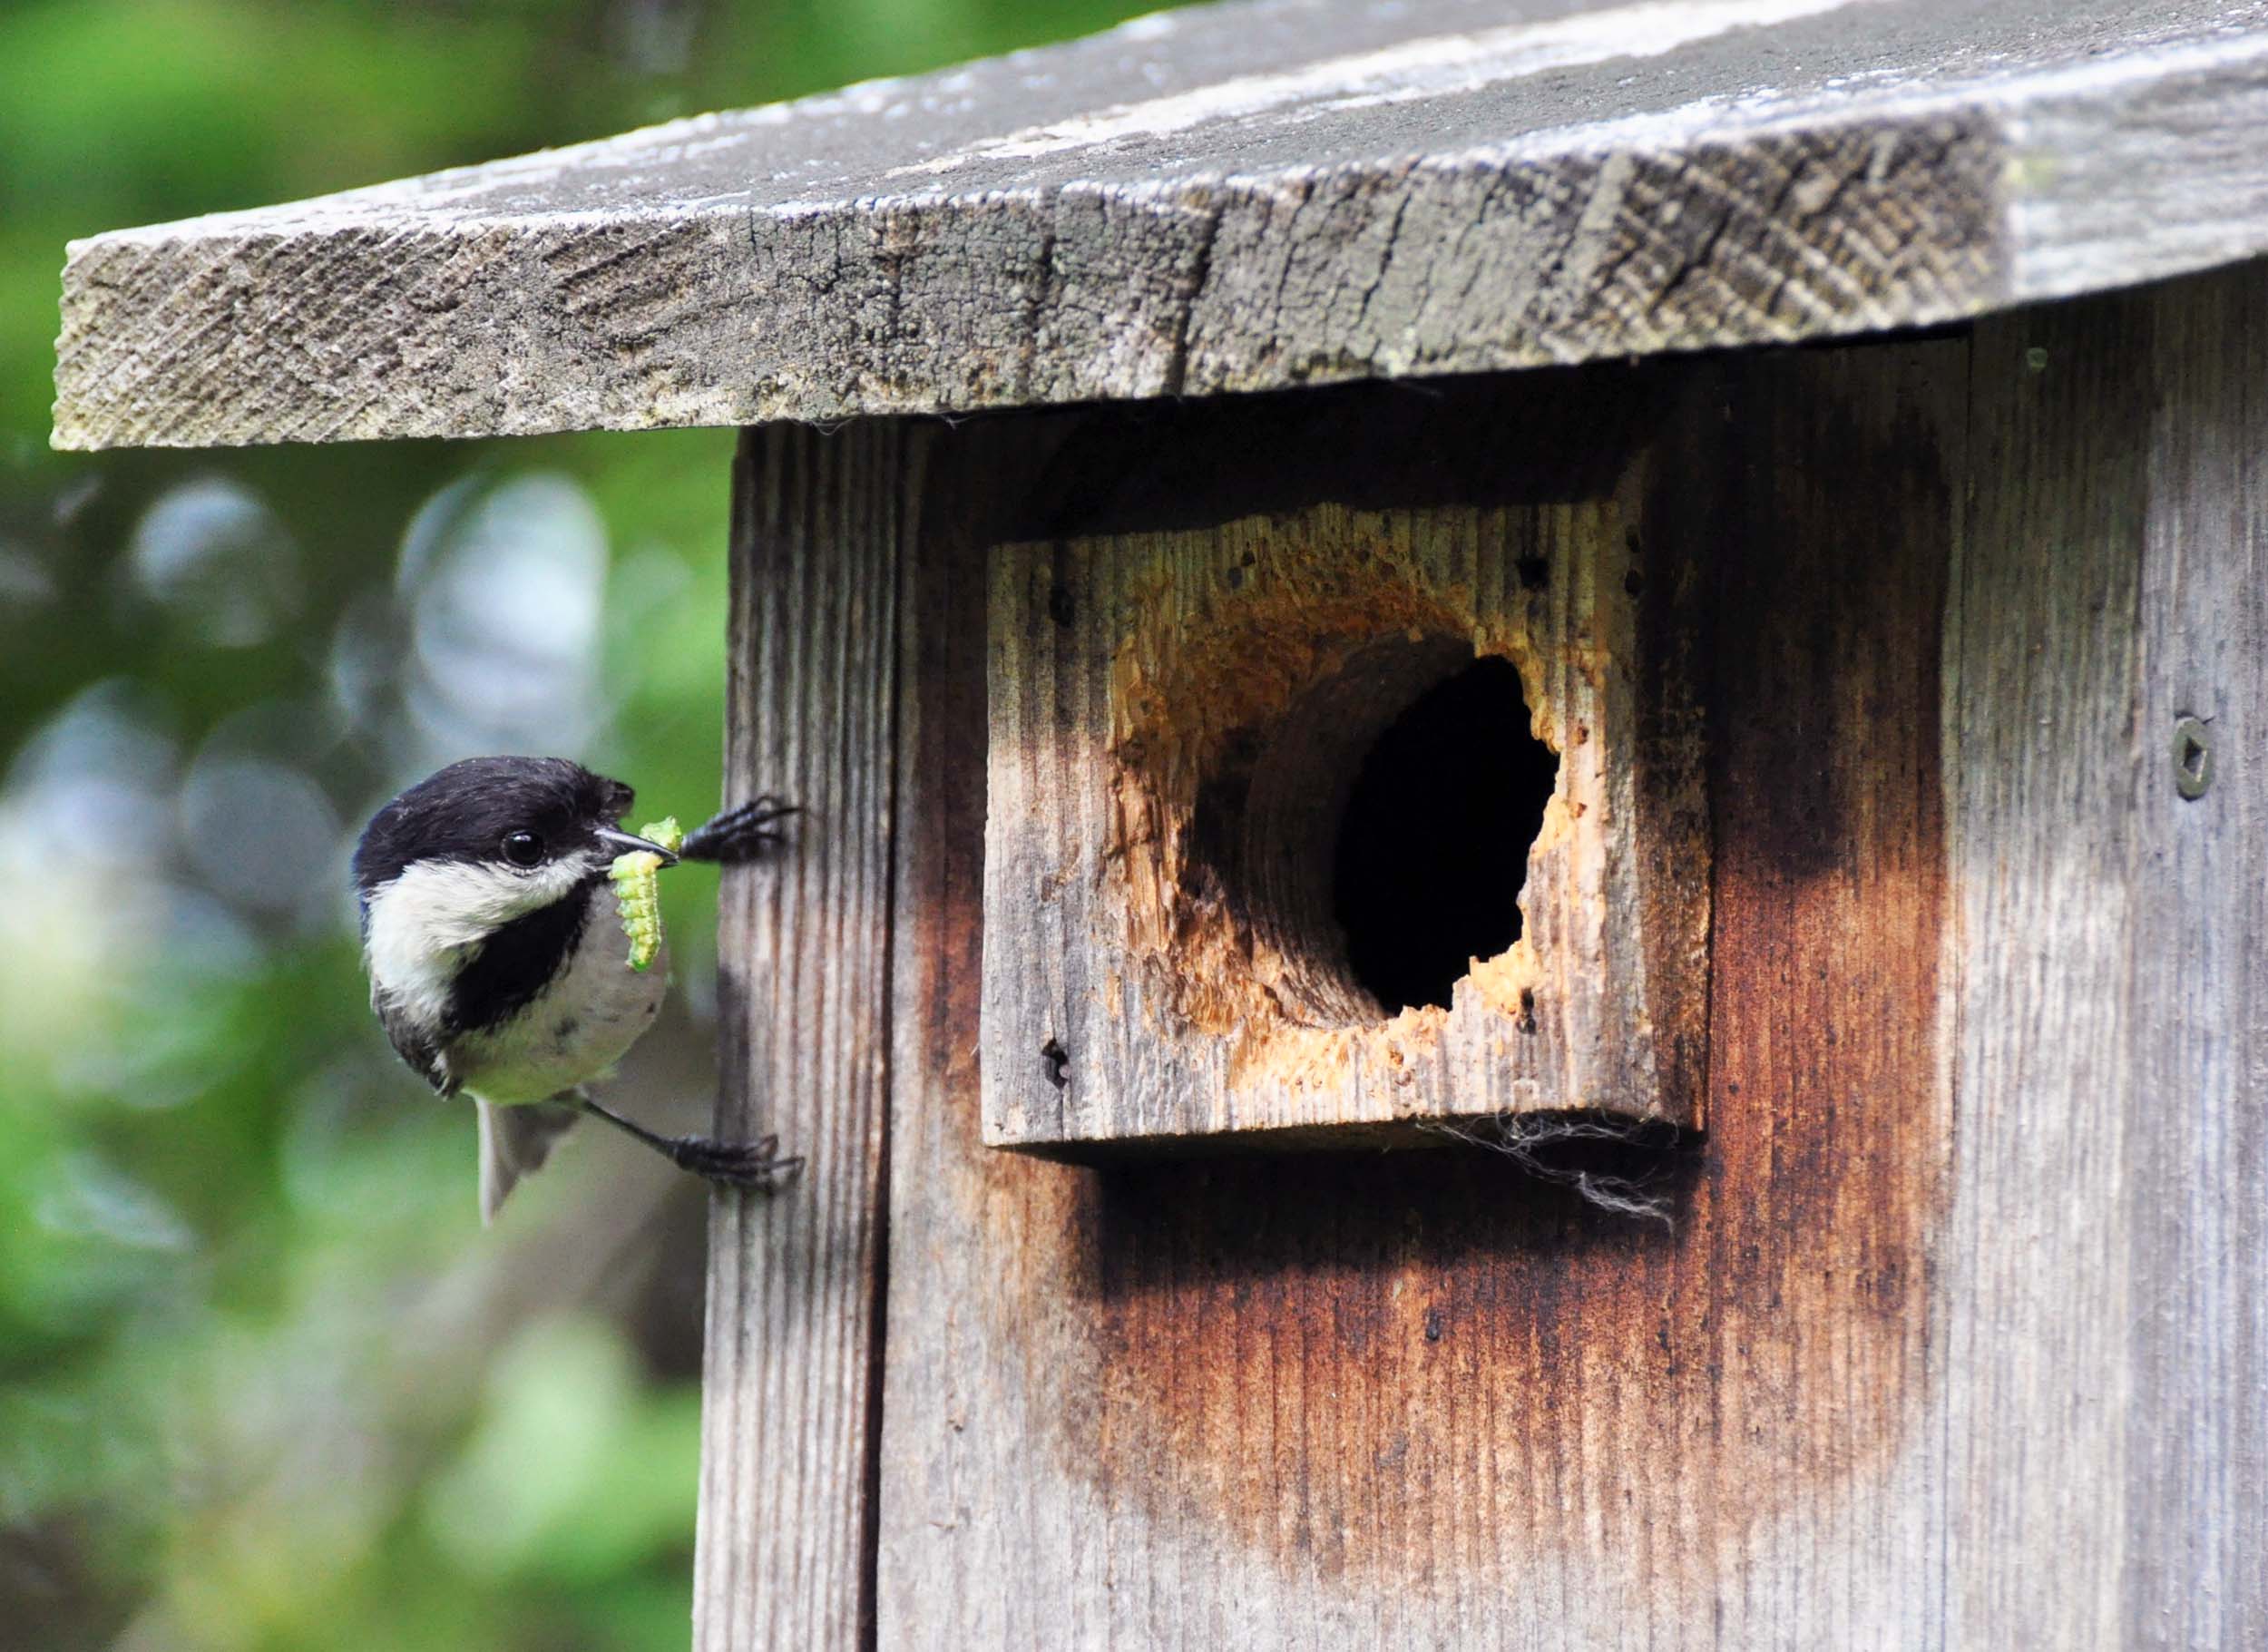 A small bird perched on a wooden birdhouse with an insect in its beak